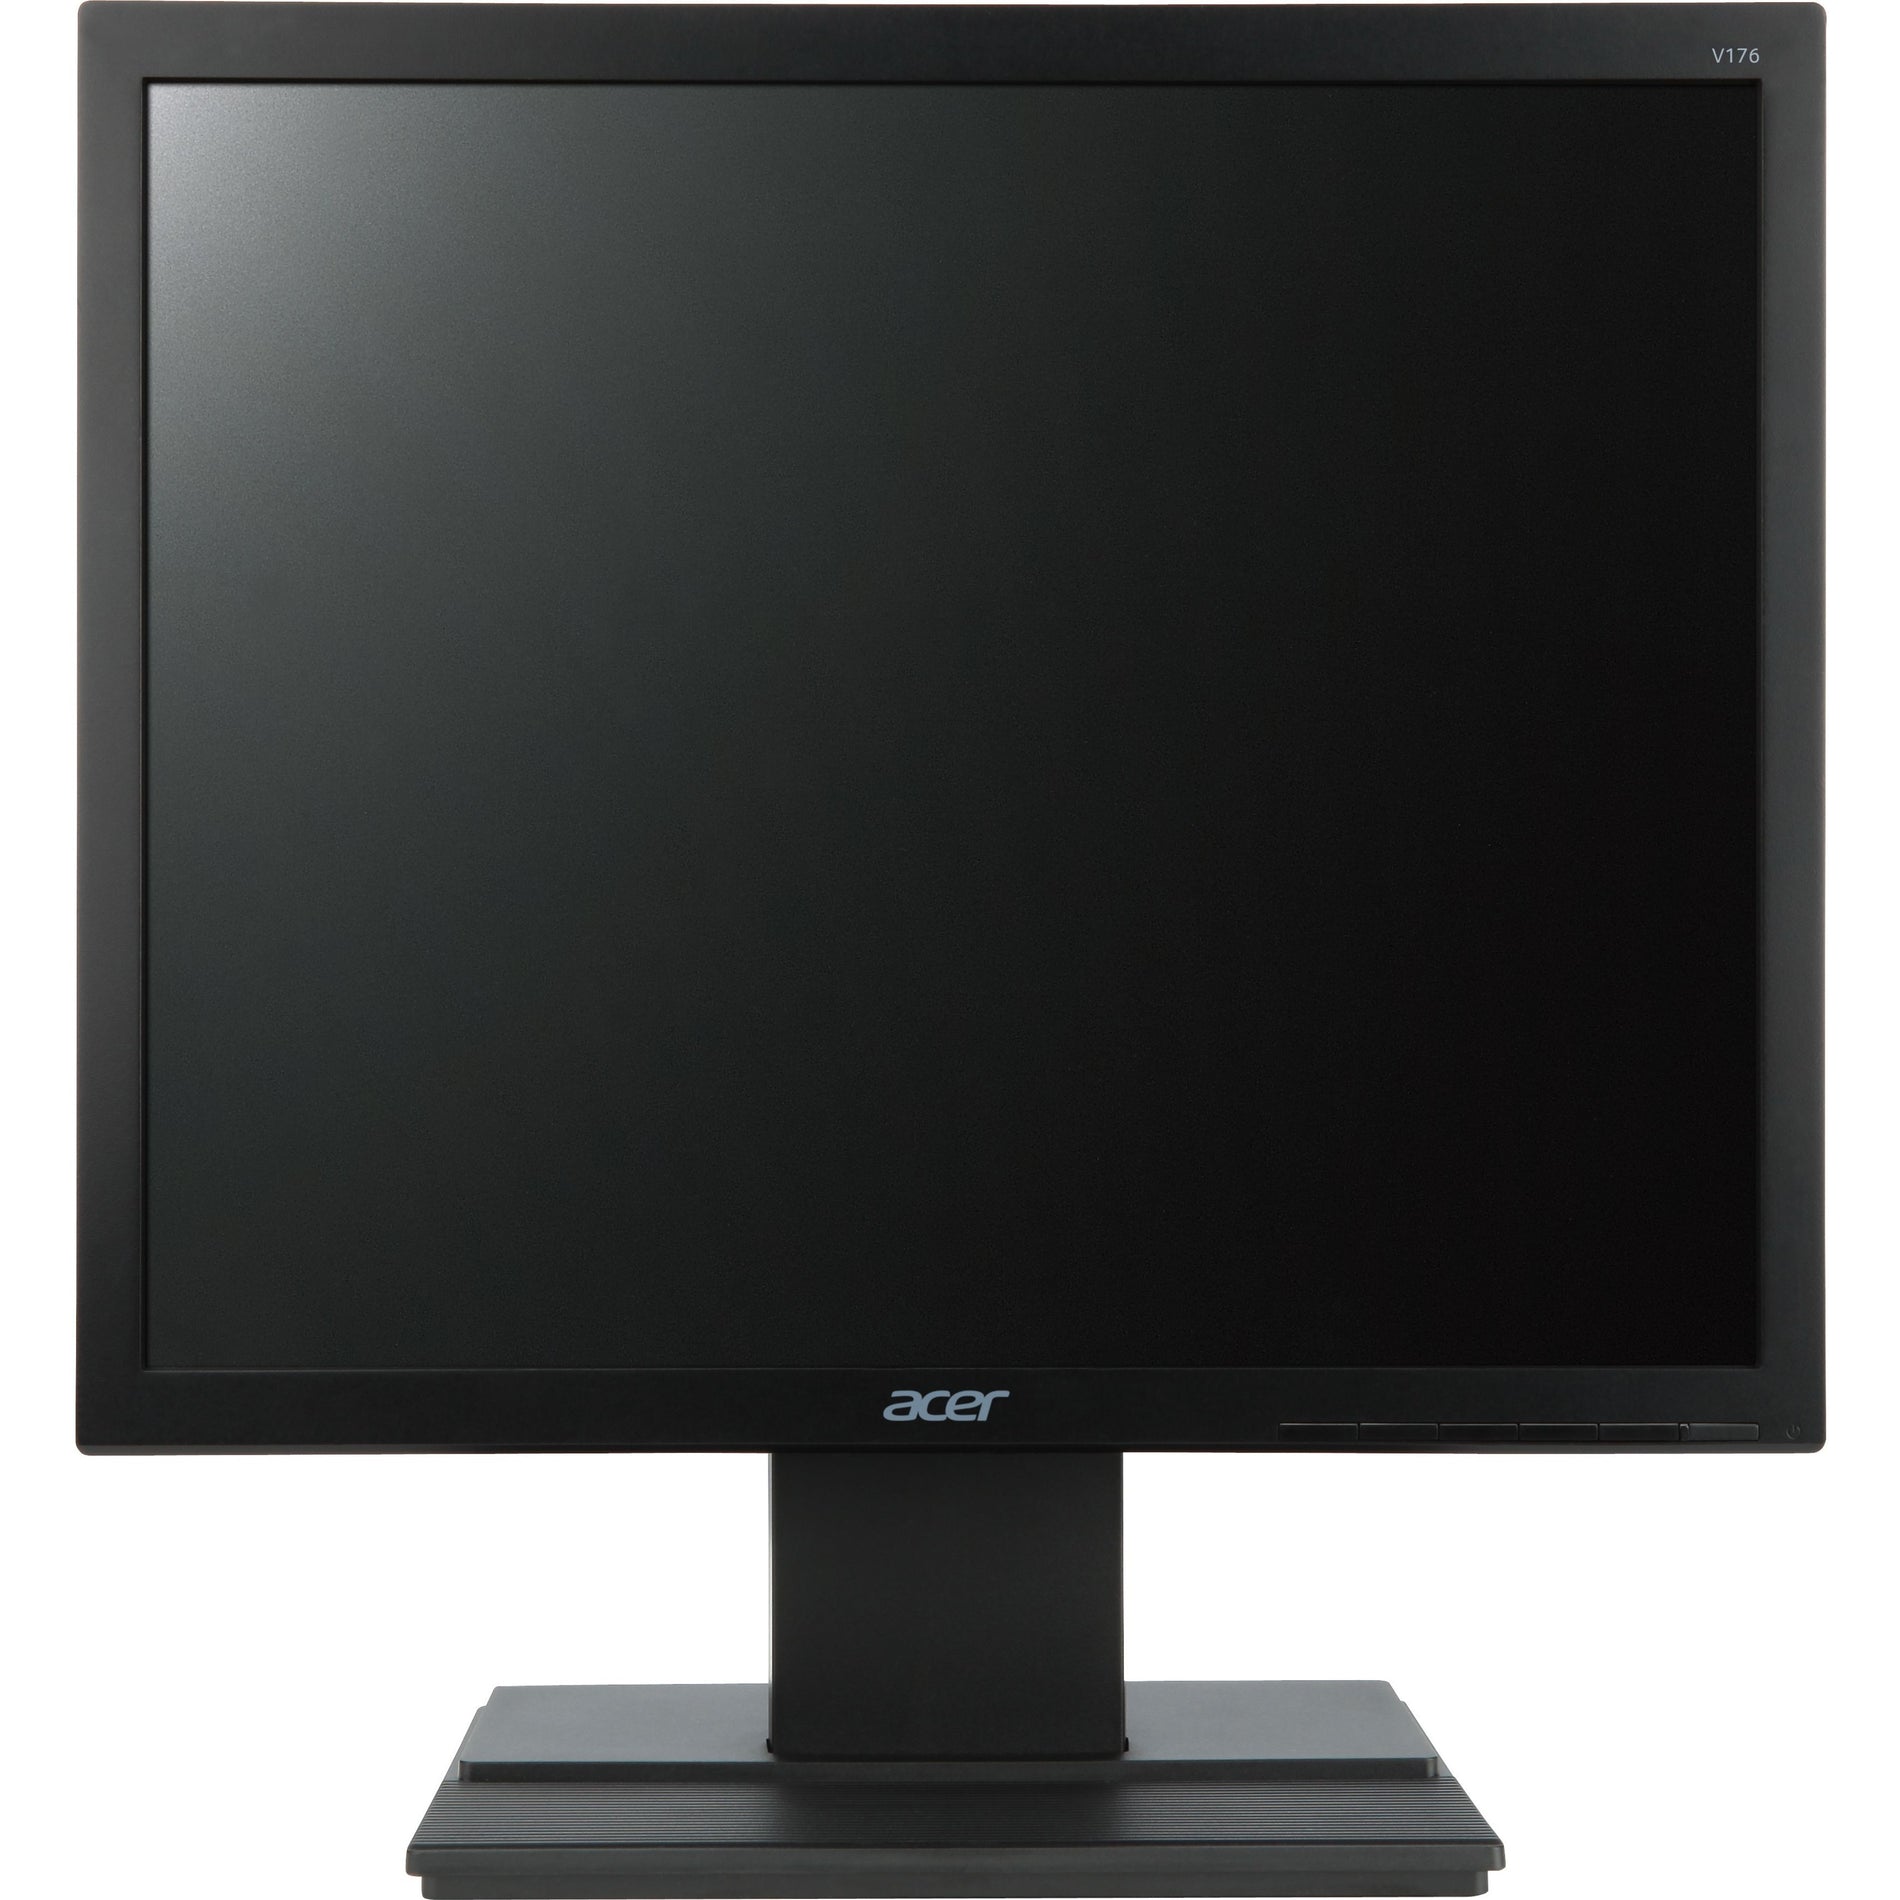 Acer UM.BV6AA.002 V176L LCD Monitor, 17" 5:4, 5ms Response Time, 100000000:1 Contrast Ratio